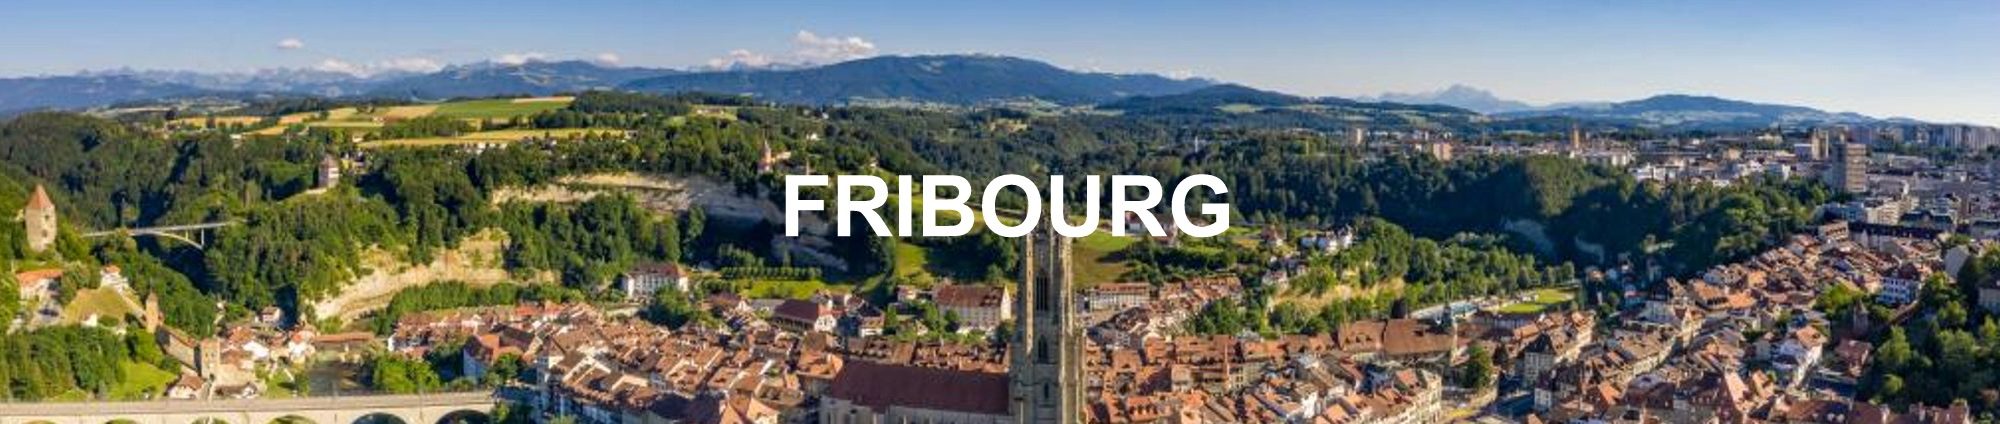 prix m2 immobilier fribourg 2022